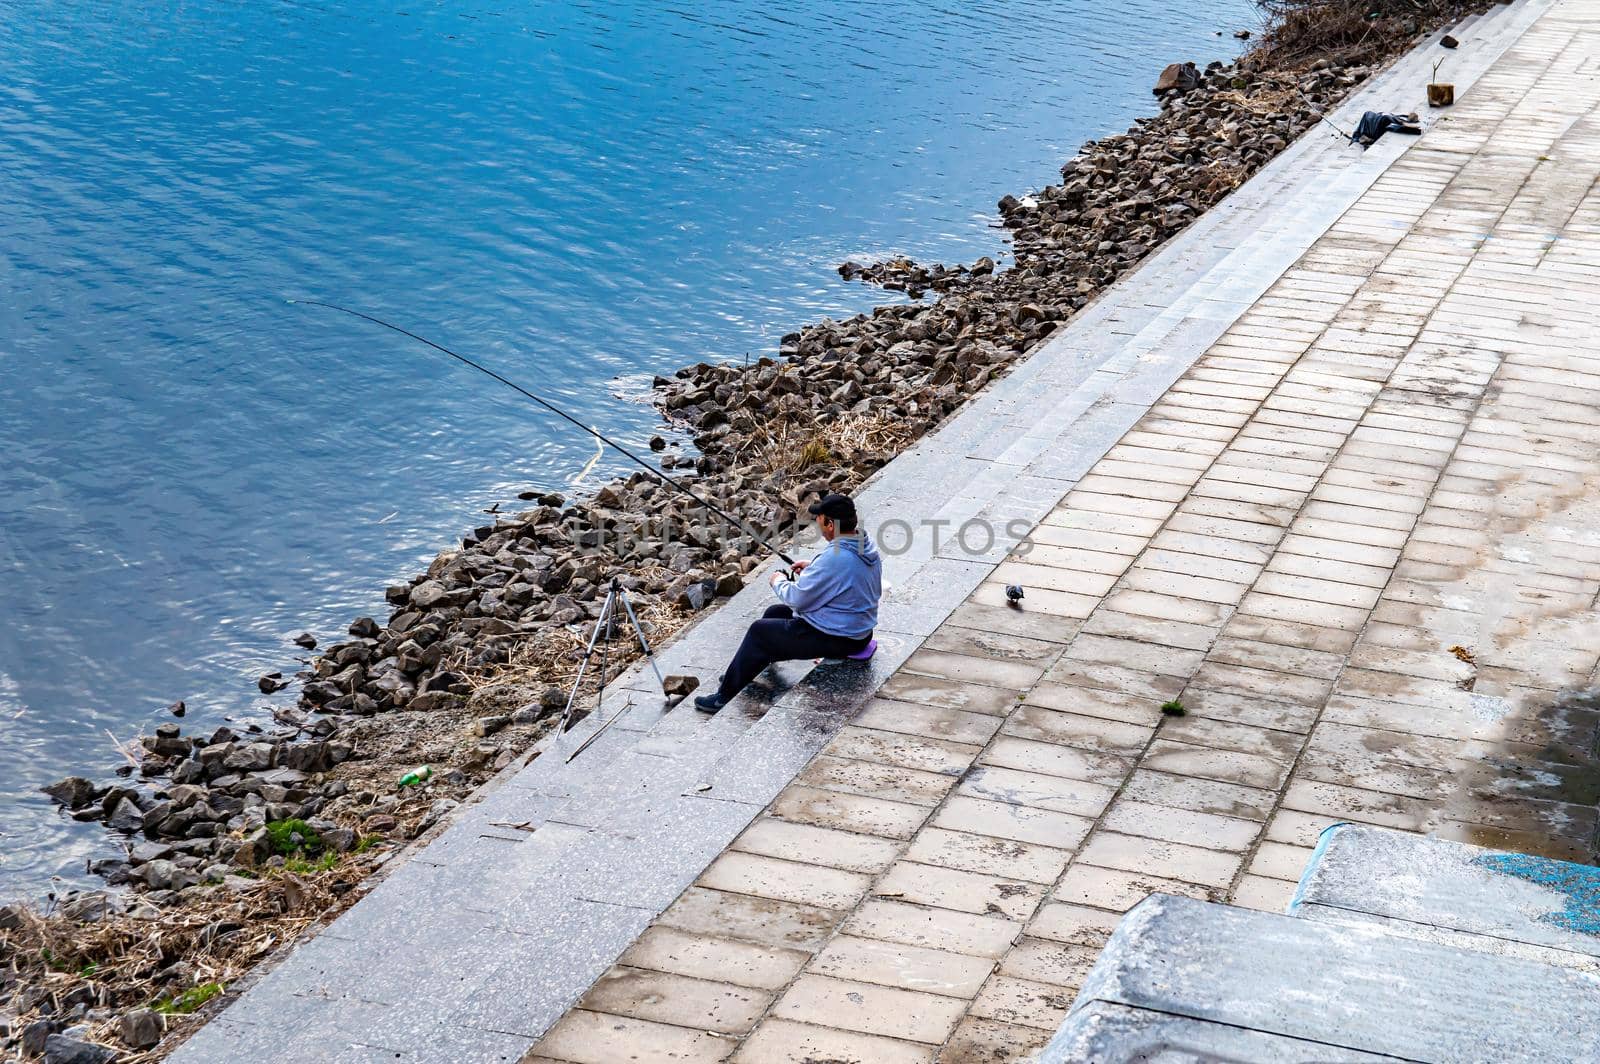 The fisherman catches fish on the embankment of the river. Fishing tackle. The man is a fisherman. Dnepr River. Water flow. City embankment. Fisherman's catch. Leisure activities.